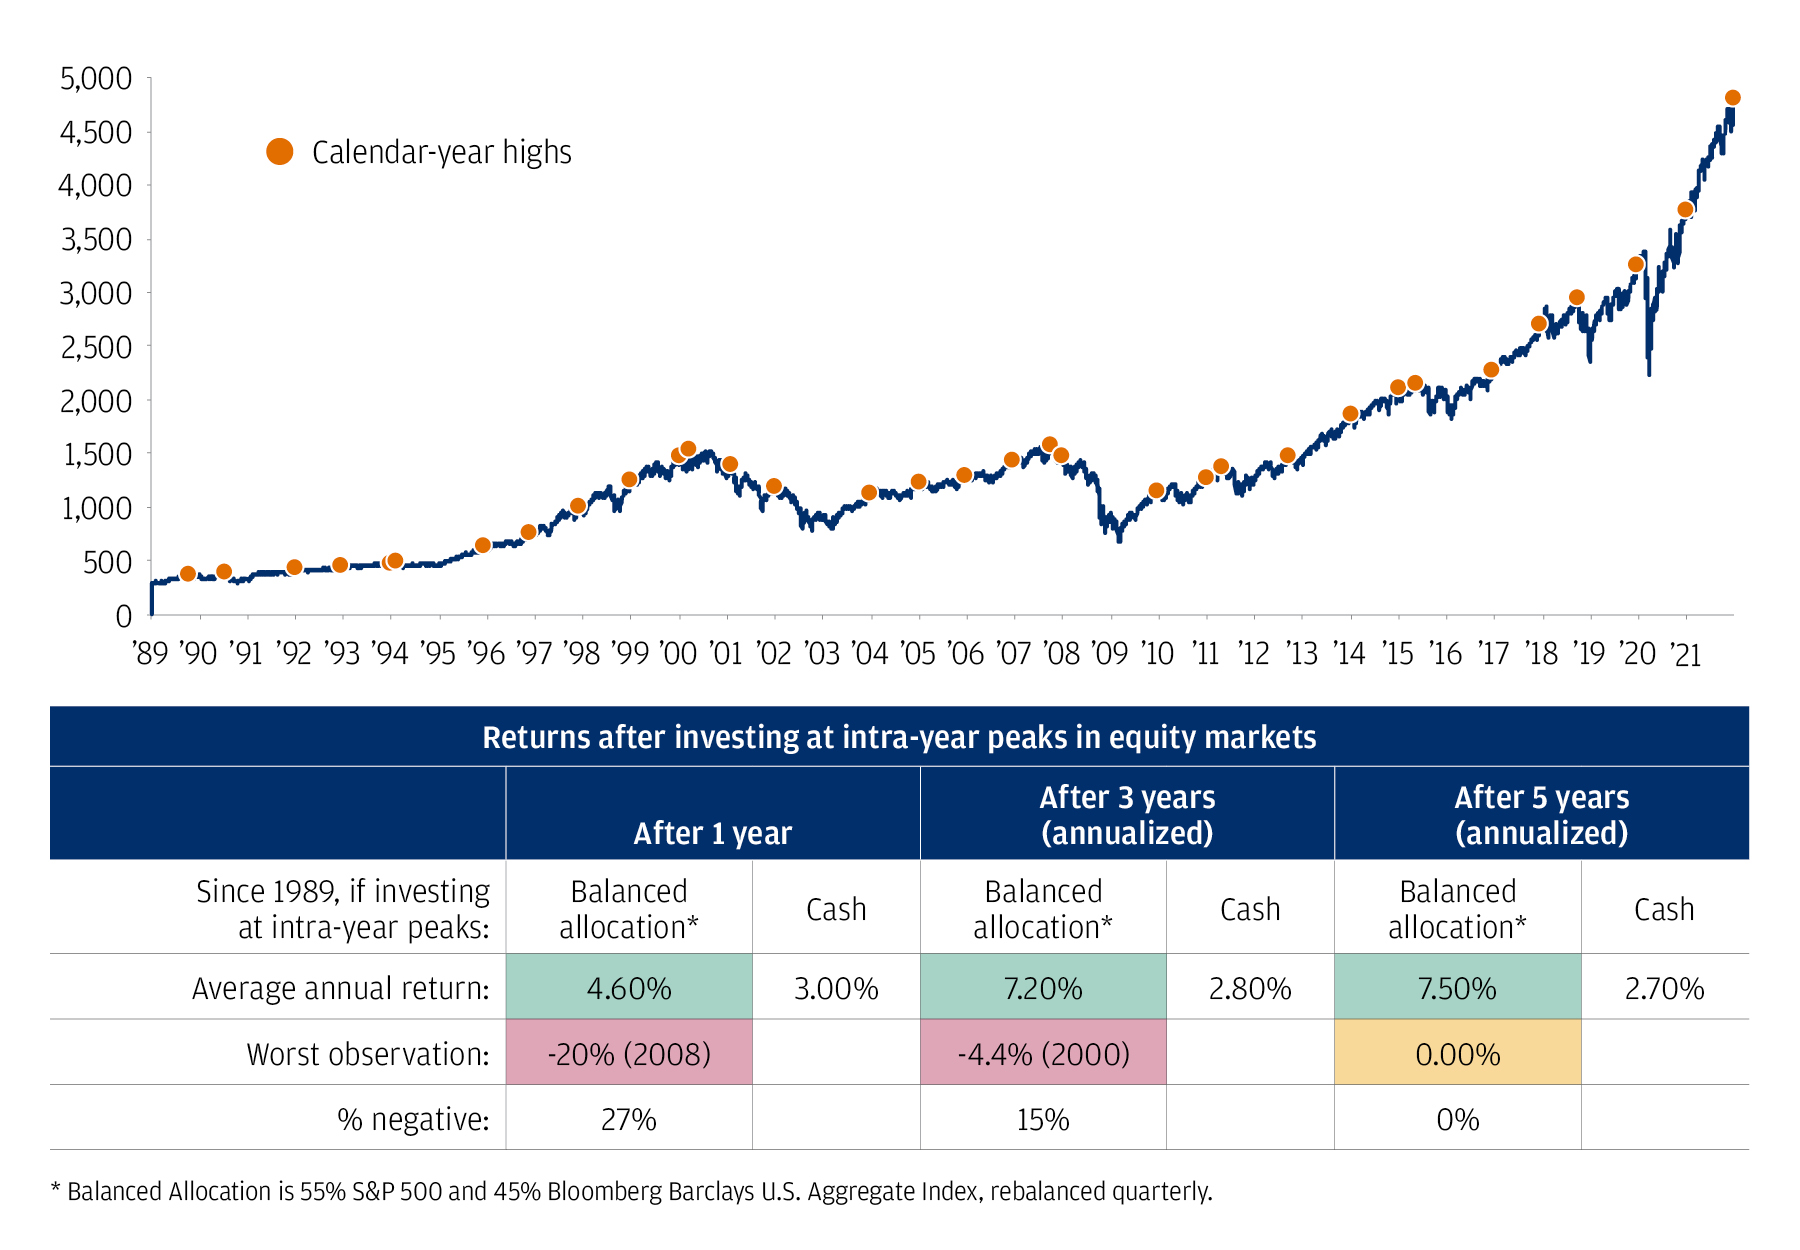 A line chart shows returns after investing at intra-year market highs from 1989 through 2021. The S&P 500 has risen over time. The graphic also presents a table showing that an investor who put money to work at intra-year peaks in the equity market generated a 7.5% annualized return over a 5-year time horizon from a balanced allocation (which assumes a 55% allocation to the S&P 500 and a 45% allocation to the Bloomberg Barclays U.S. Aggregate index, rebalanced quarterly), versus a 2.7% annualized return over a 5-year time horizon from an investment in cash. To note, when investing at intra-year highs, the balanced allocation has generated positive returns during each subsequent five-year period since 1989 (that’s to say, never has the annualized return been negative over that time horizon).